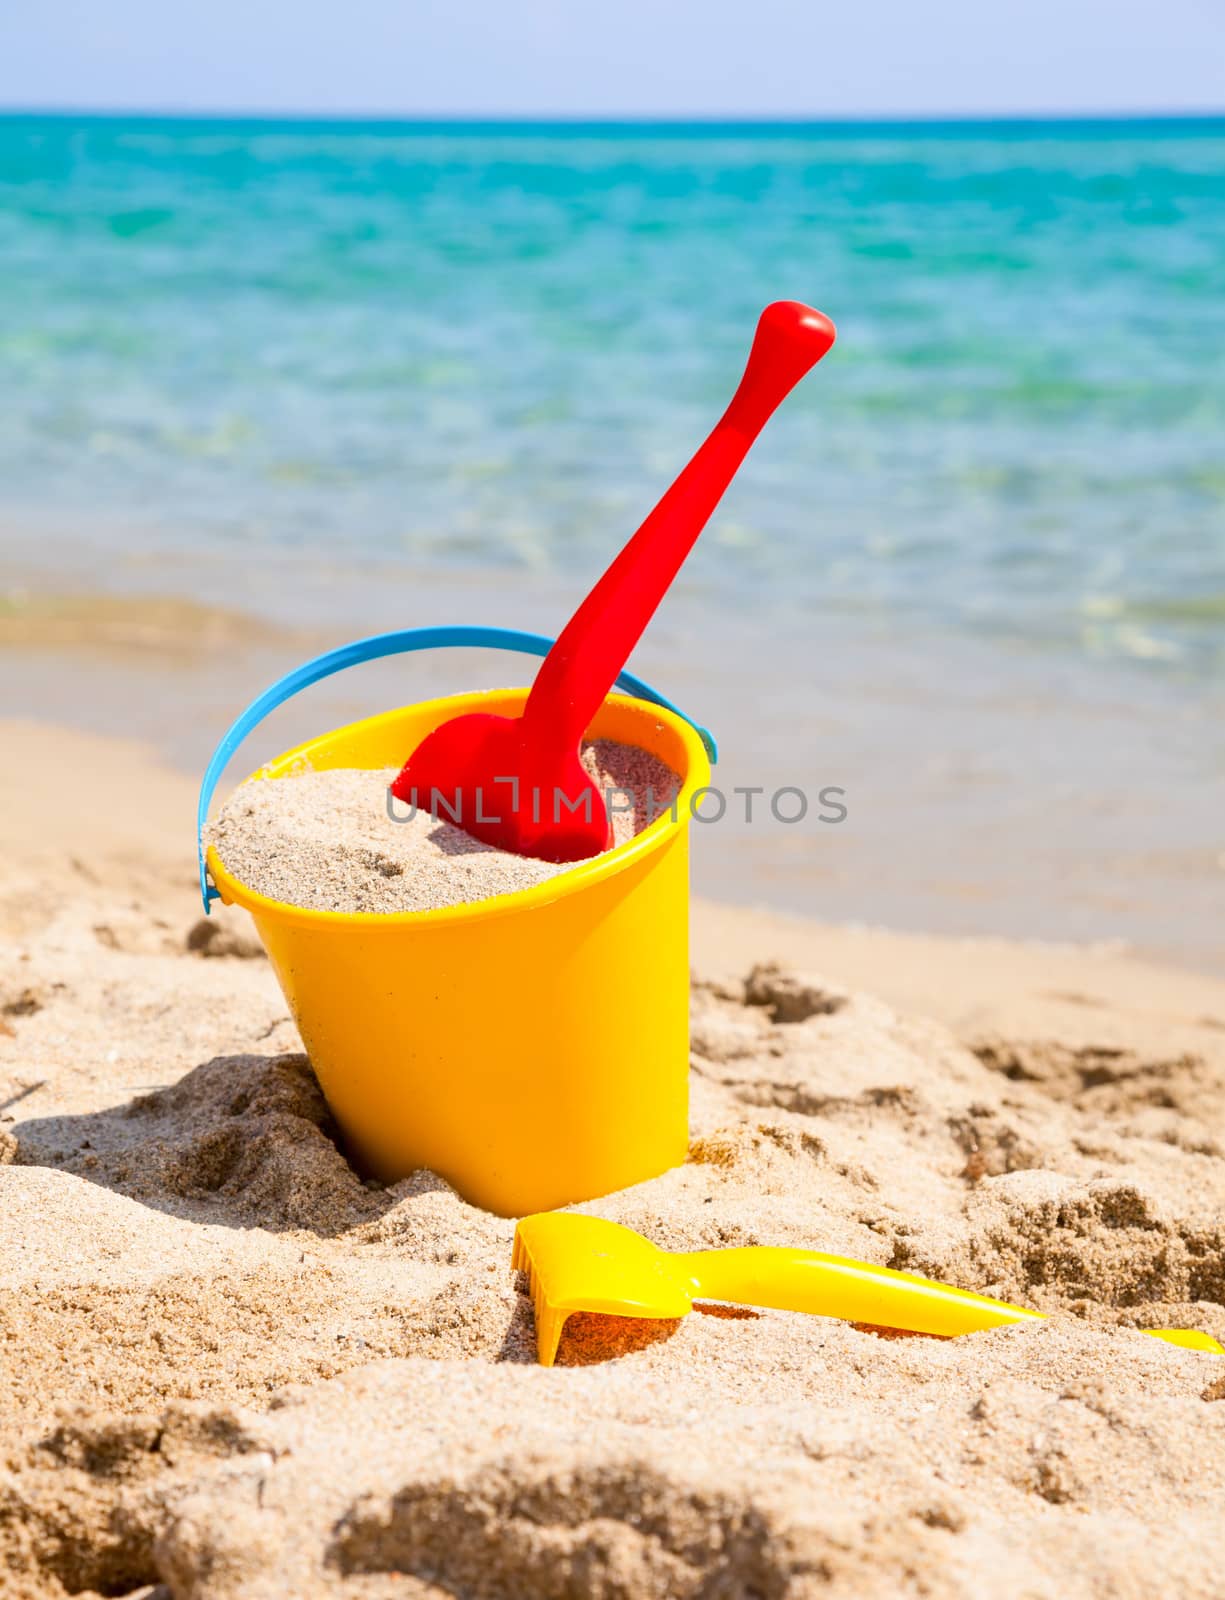 Yellow sand pail and shovel on a beach